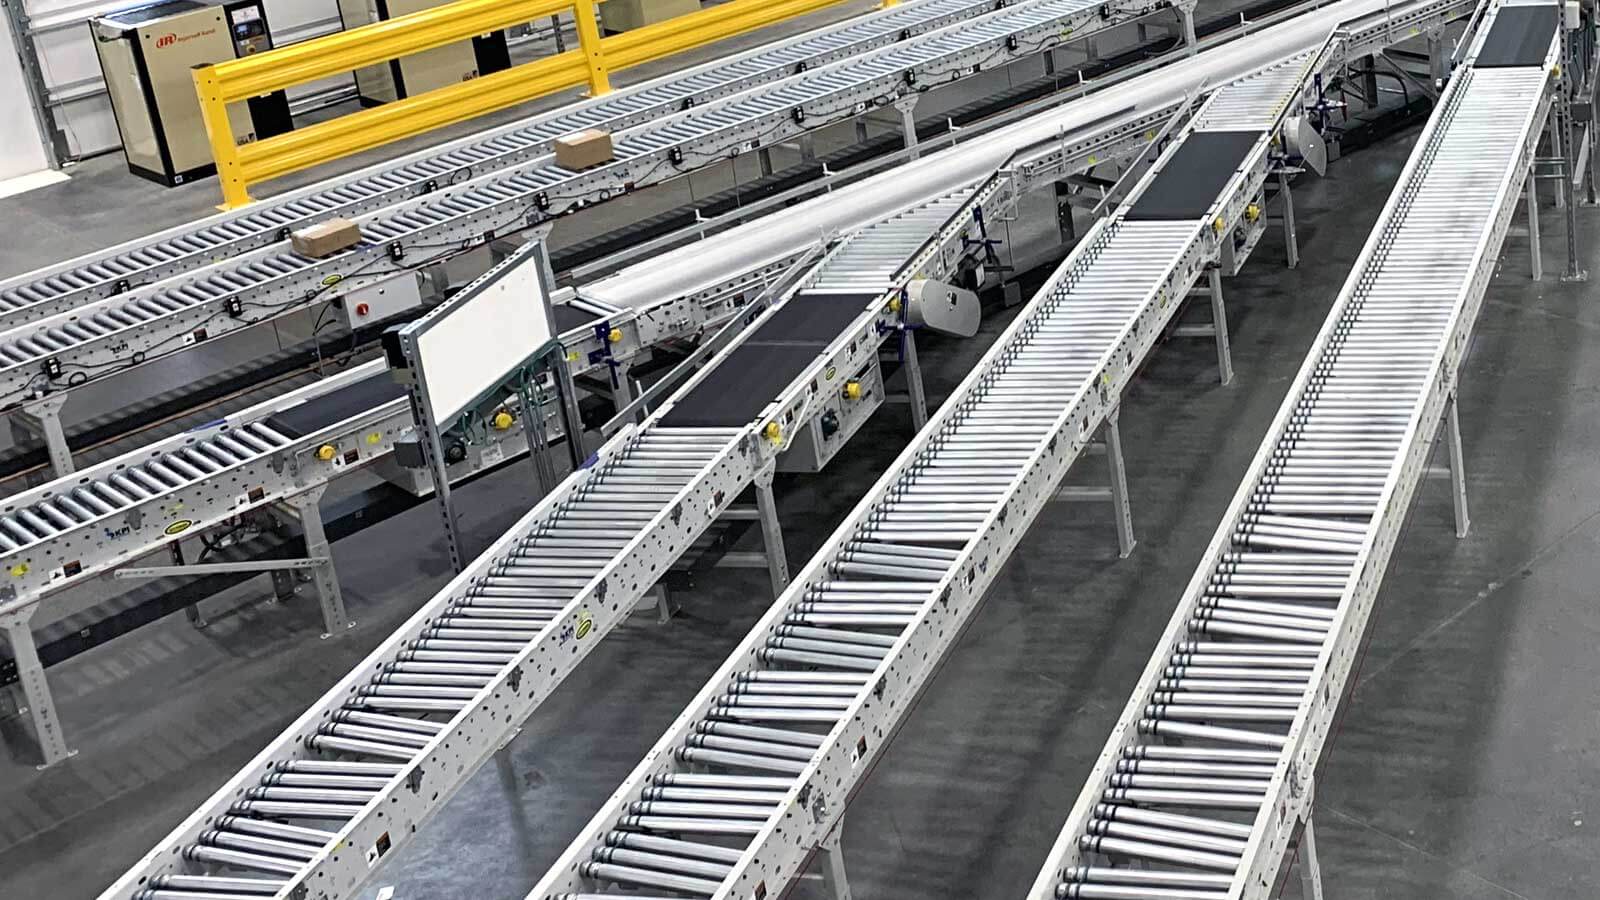 Powered Conveyor System for sorting, moving, and processing cases and boxes